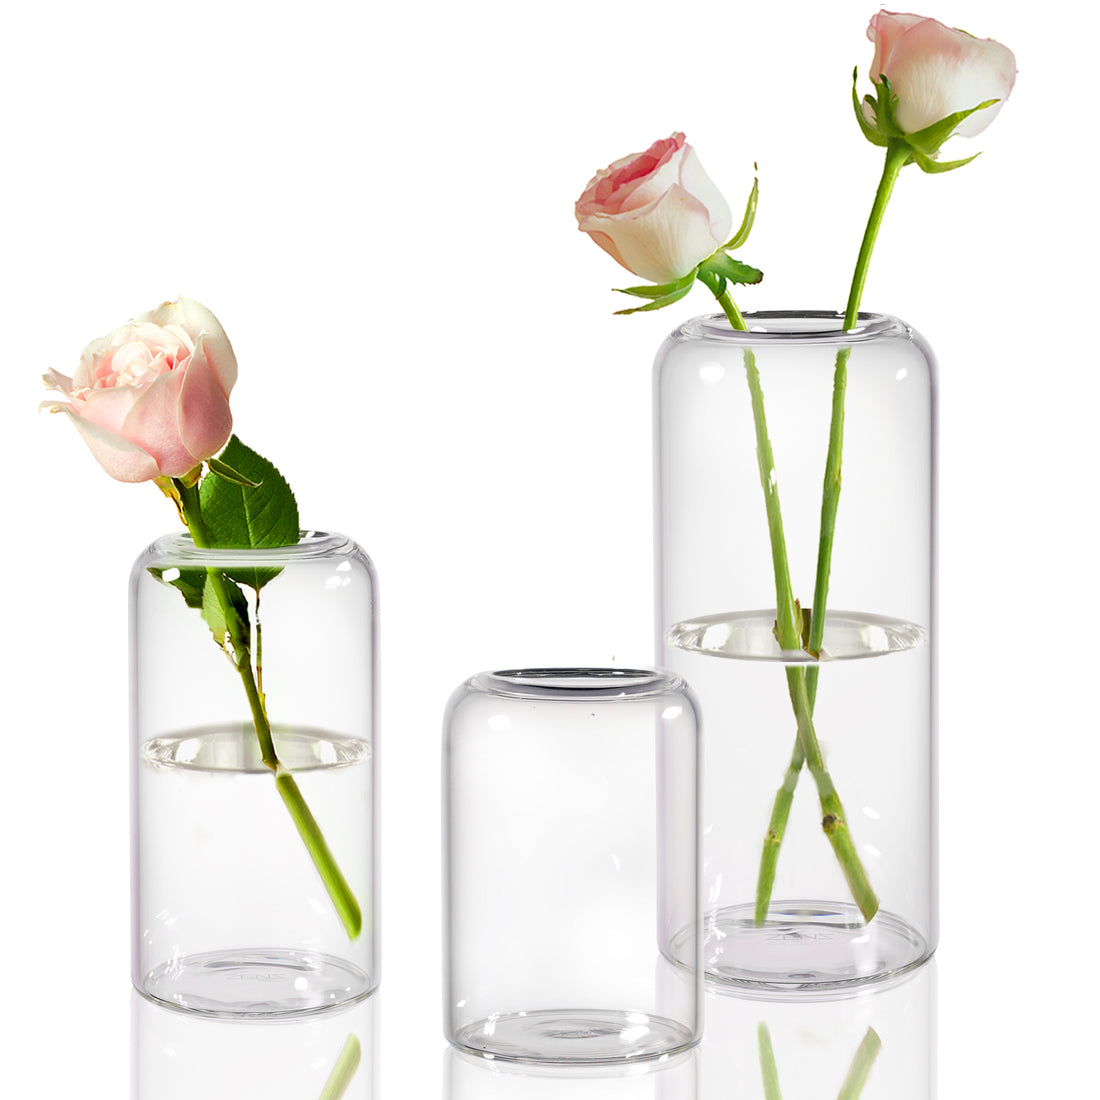 ZENS Glass Bud Vase Set of 3, Modern Hand Blown Clear Small Bud Flower Vases for Wedding Centerpieces Living Room Decorative